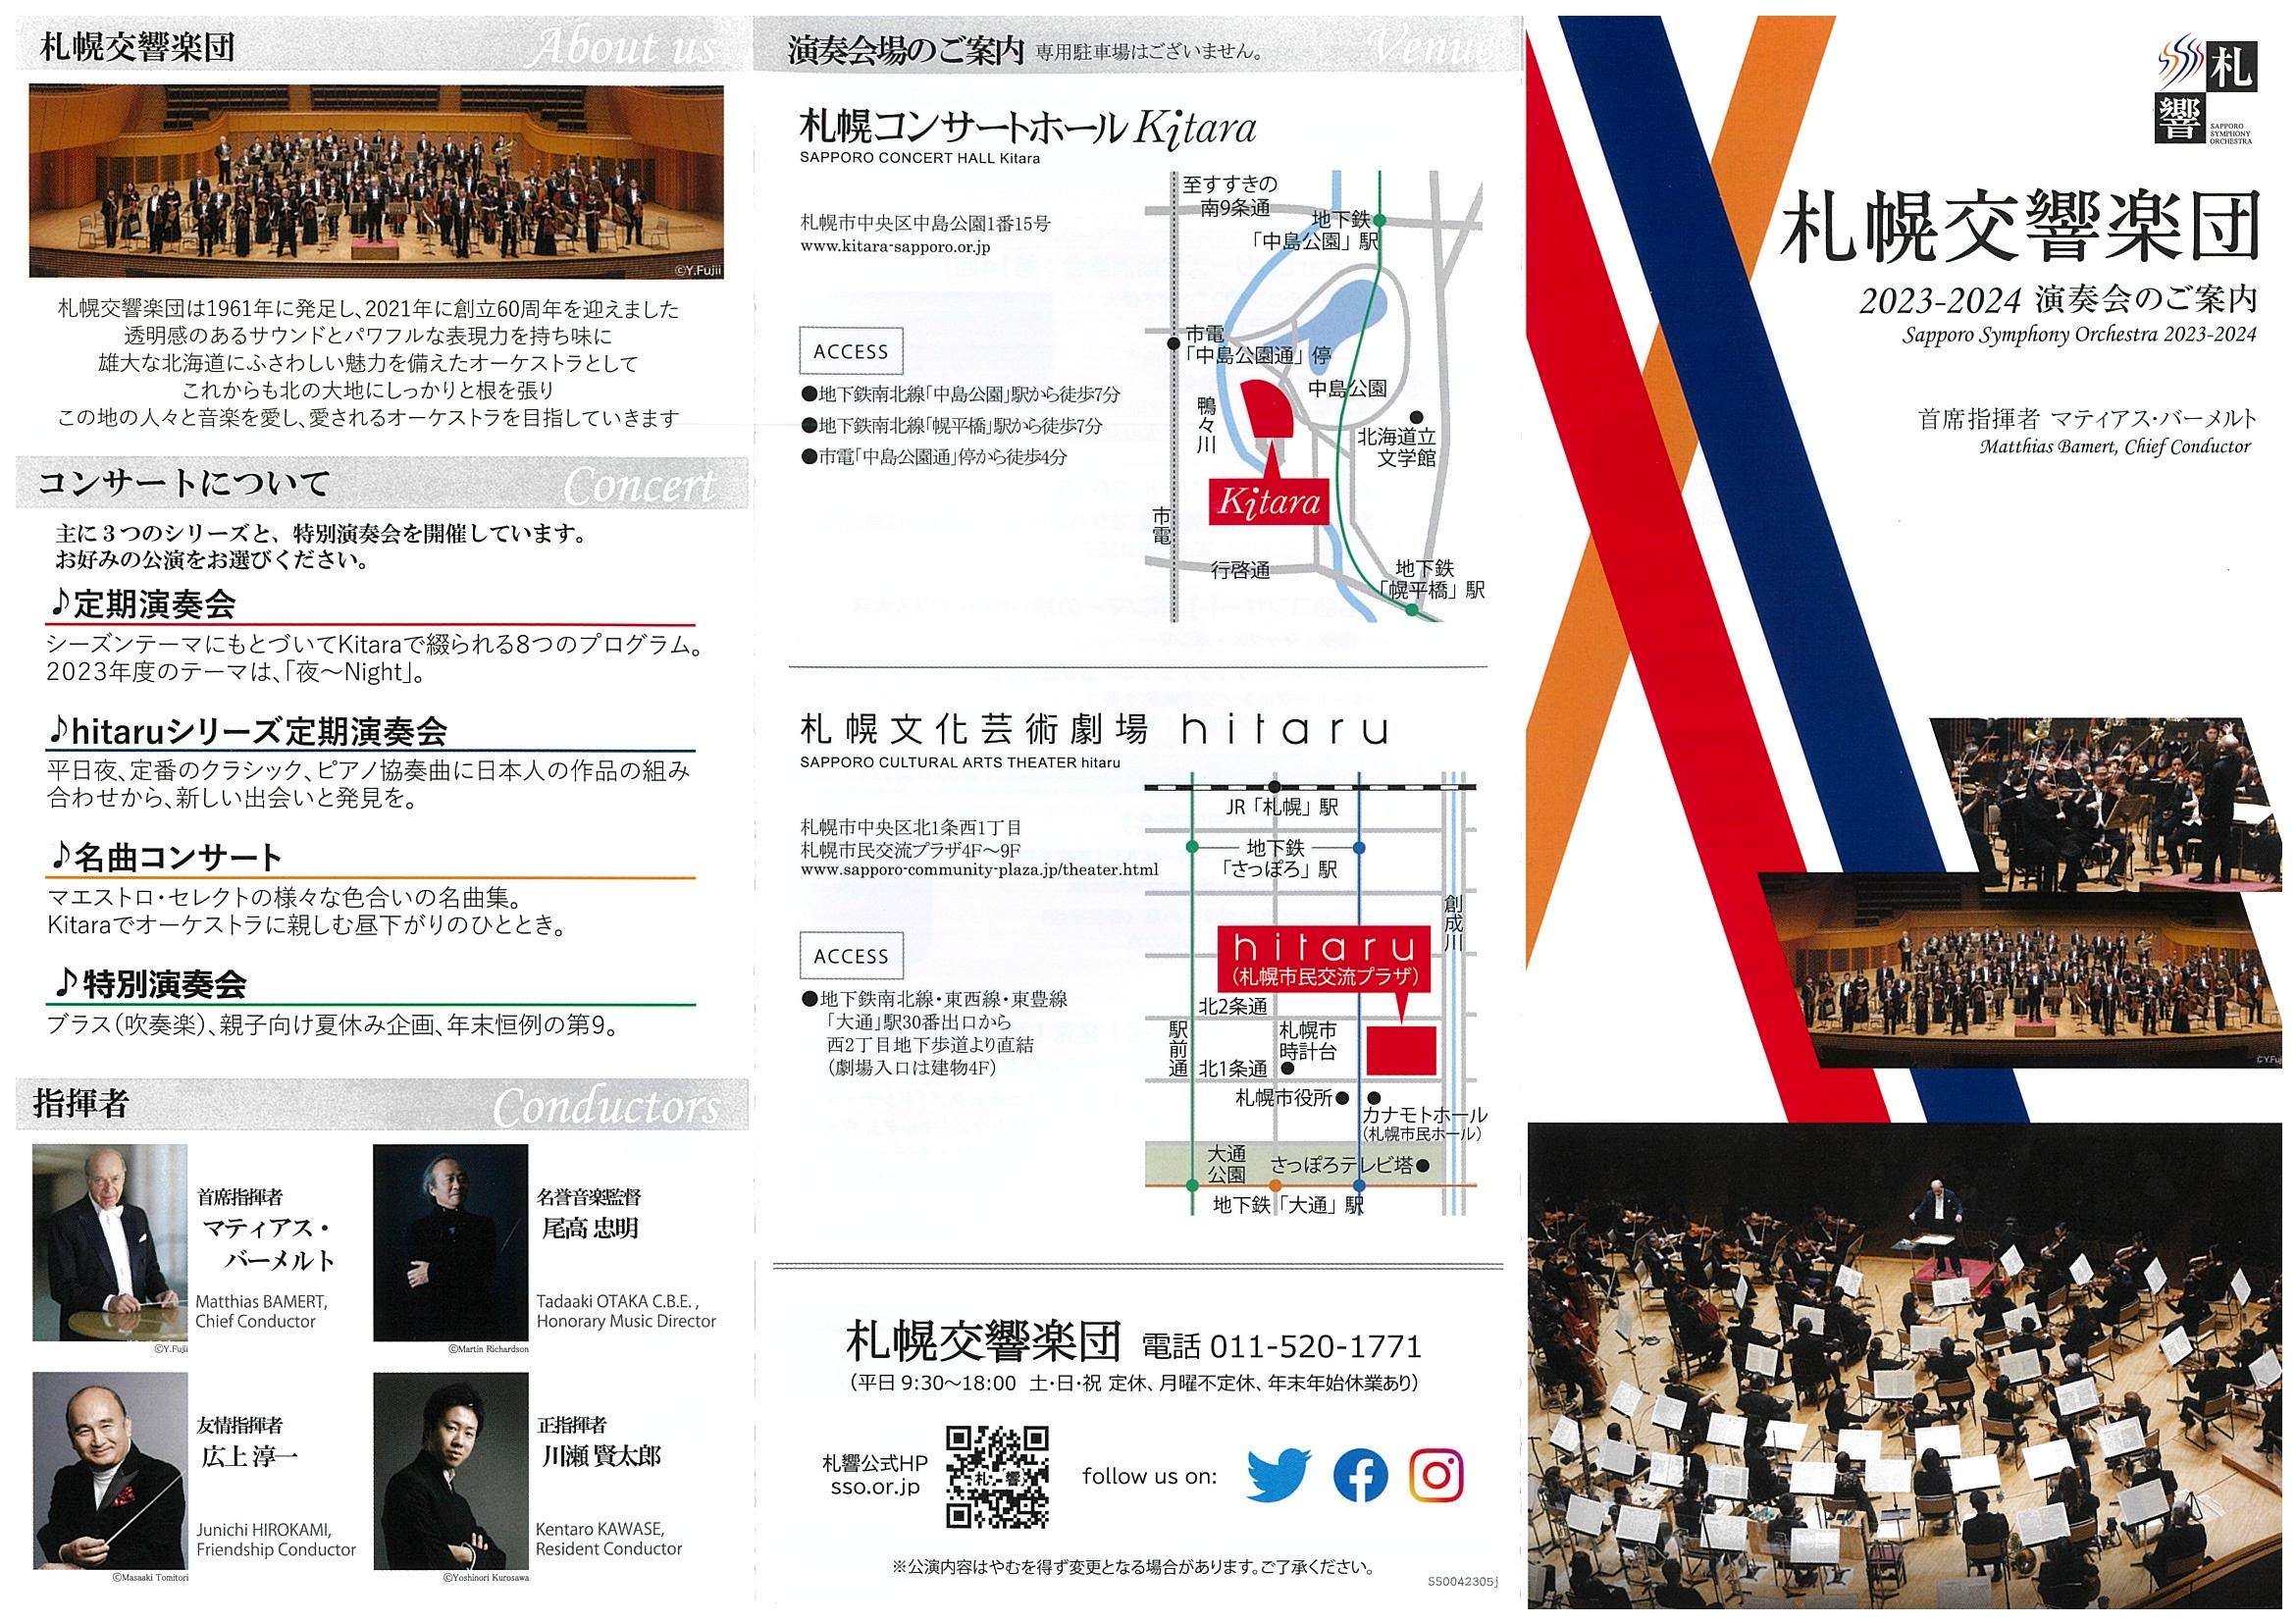 2023-2024 Concert Schedule (Sapporo Symphony Orchestra sponsored Concerts）